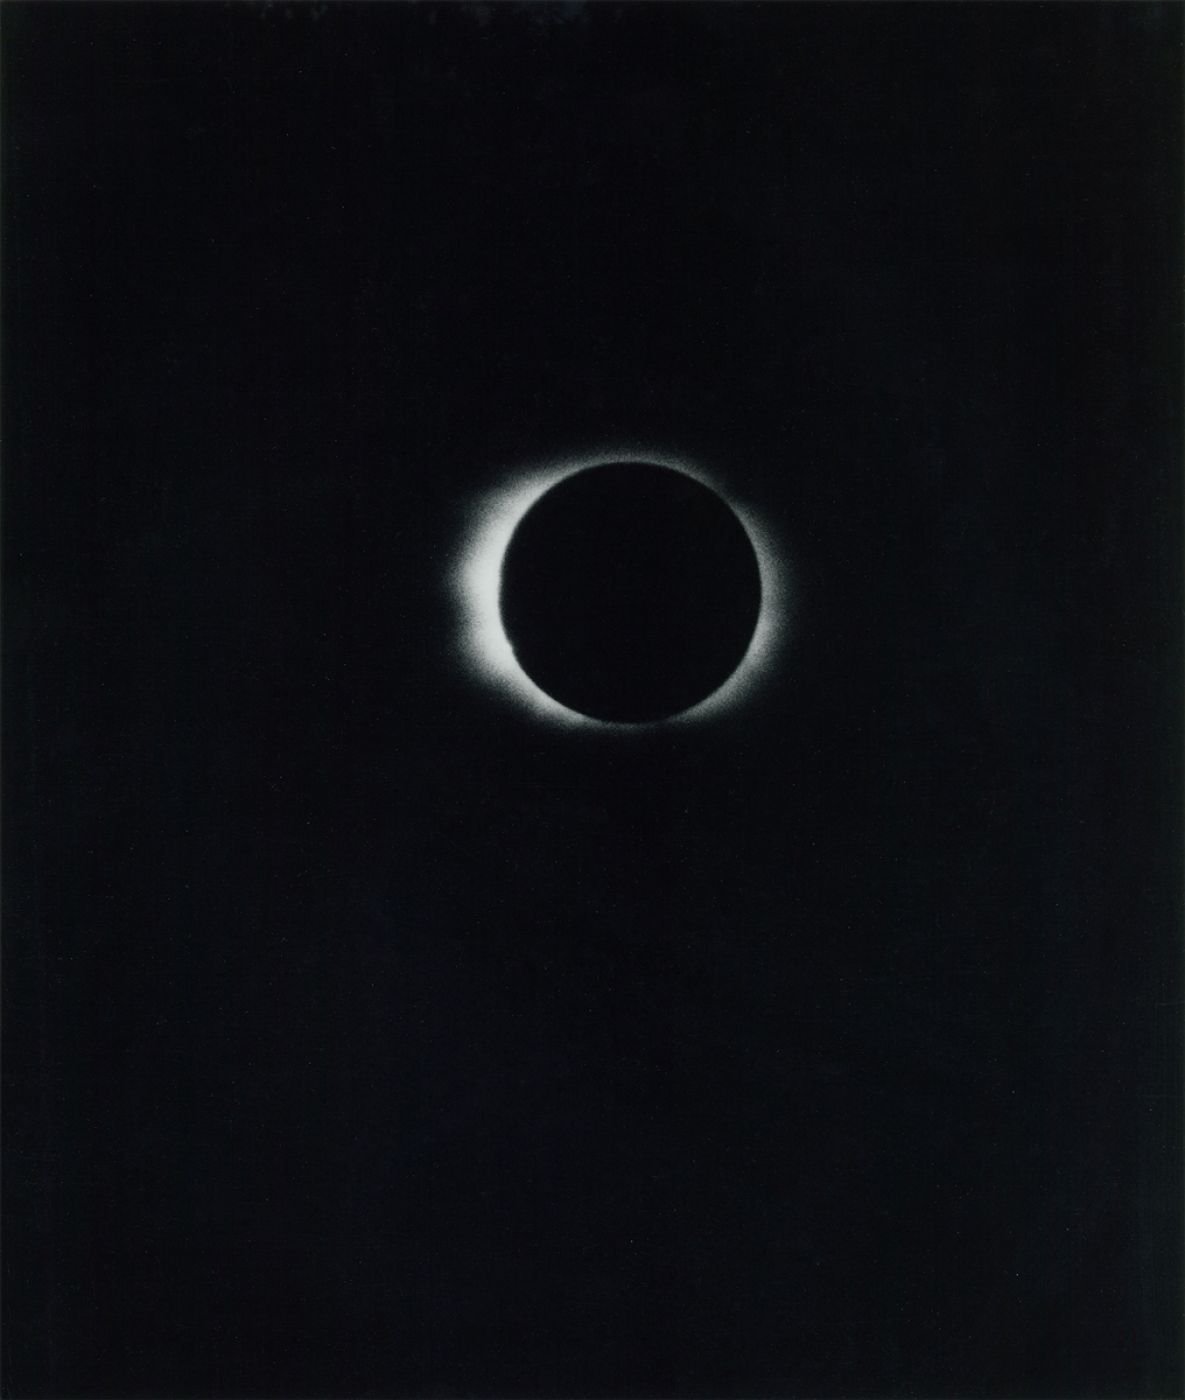 Anonymous, “Total solar eclipse”, 1973